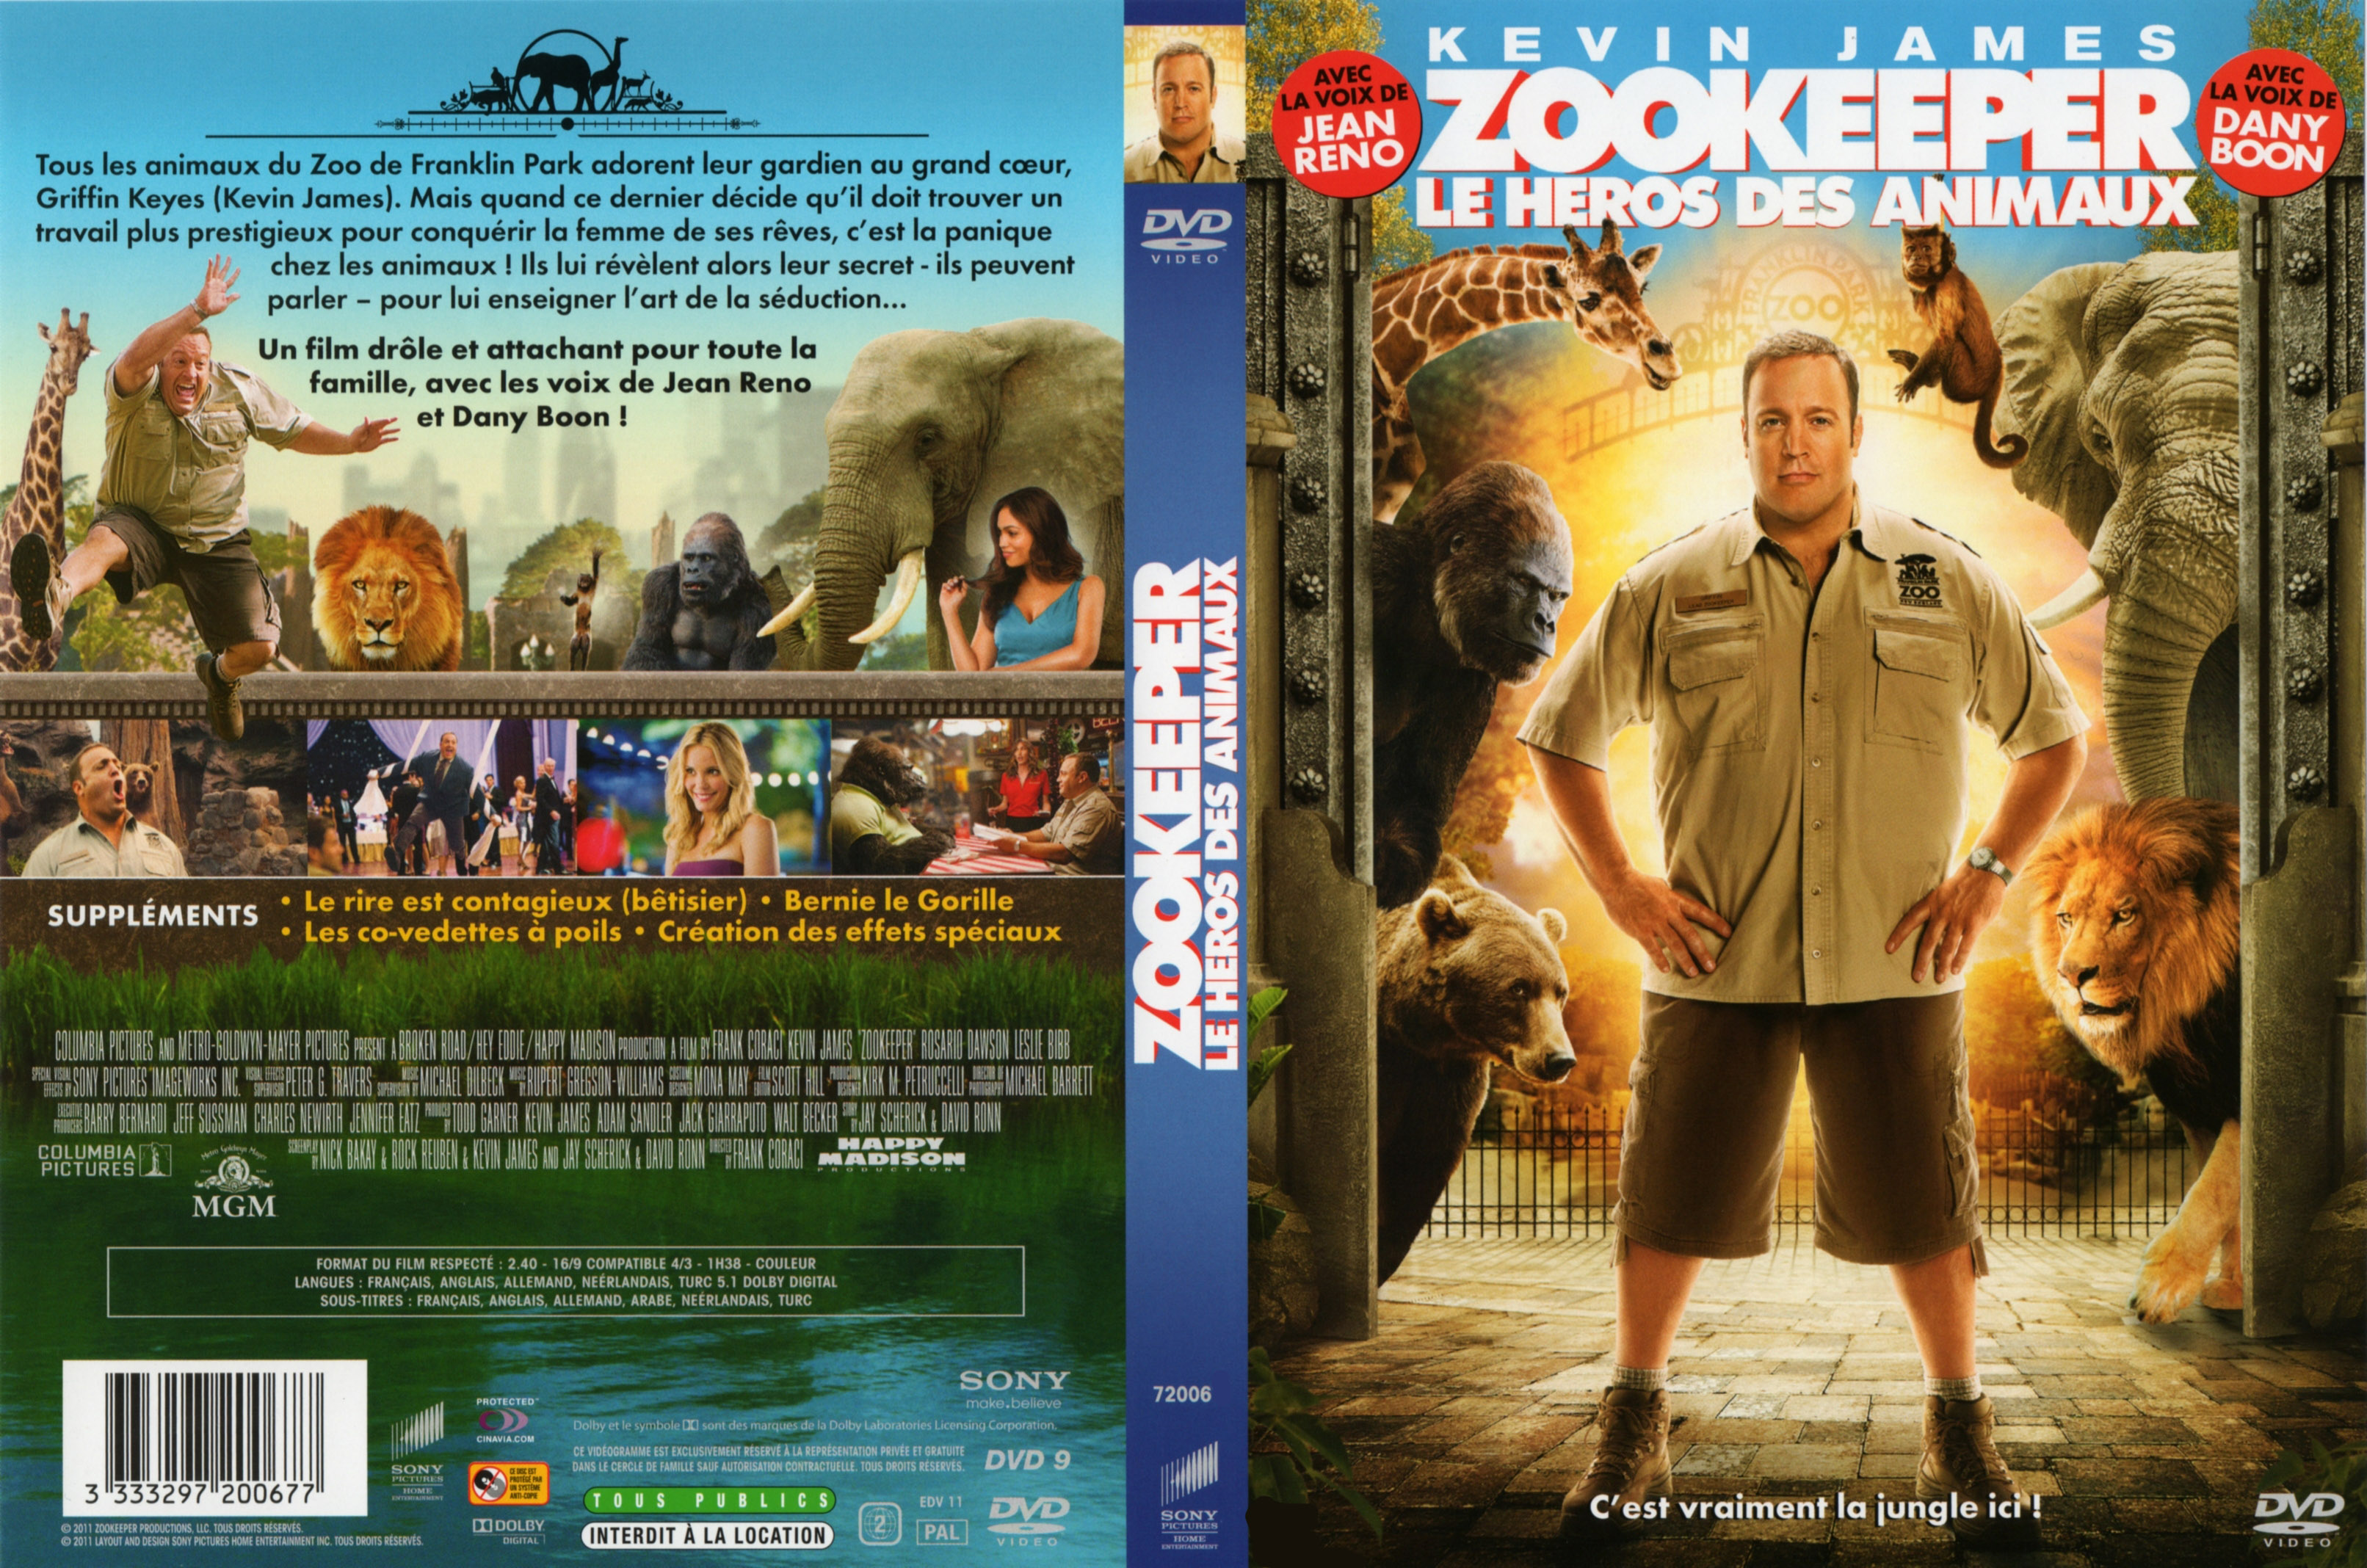 Jaquette DVD Zookeeper